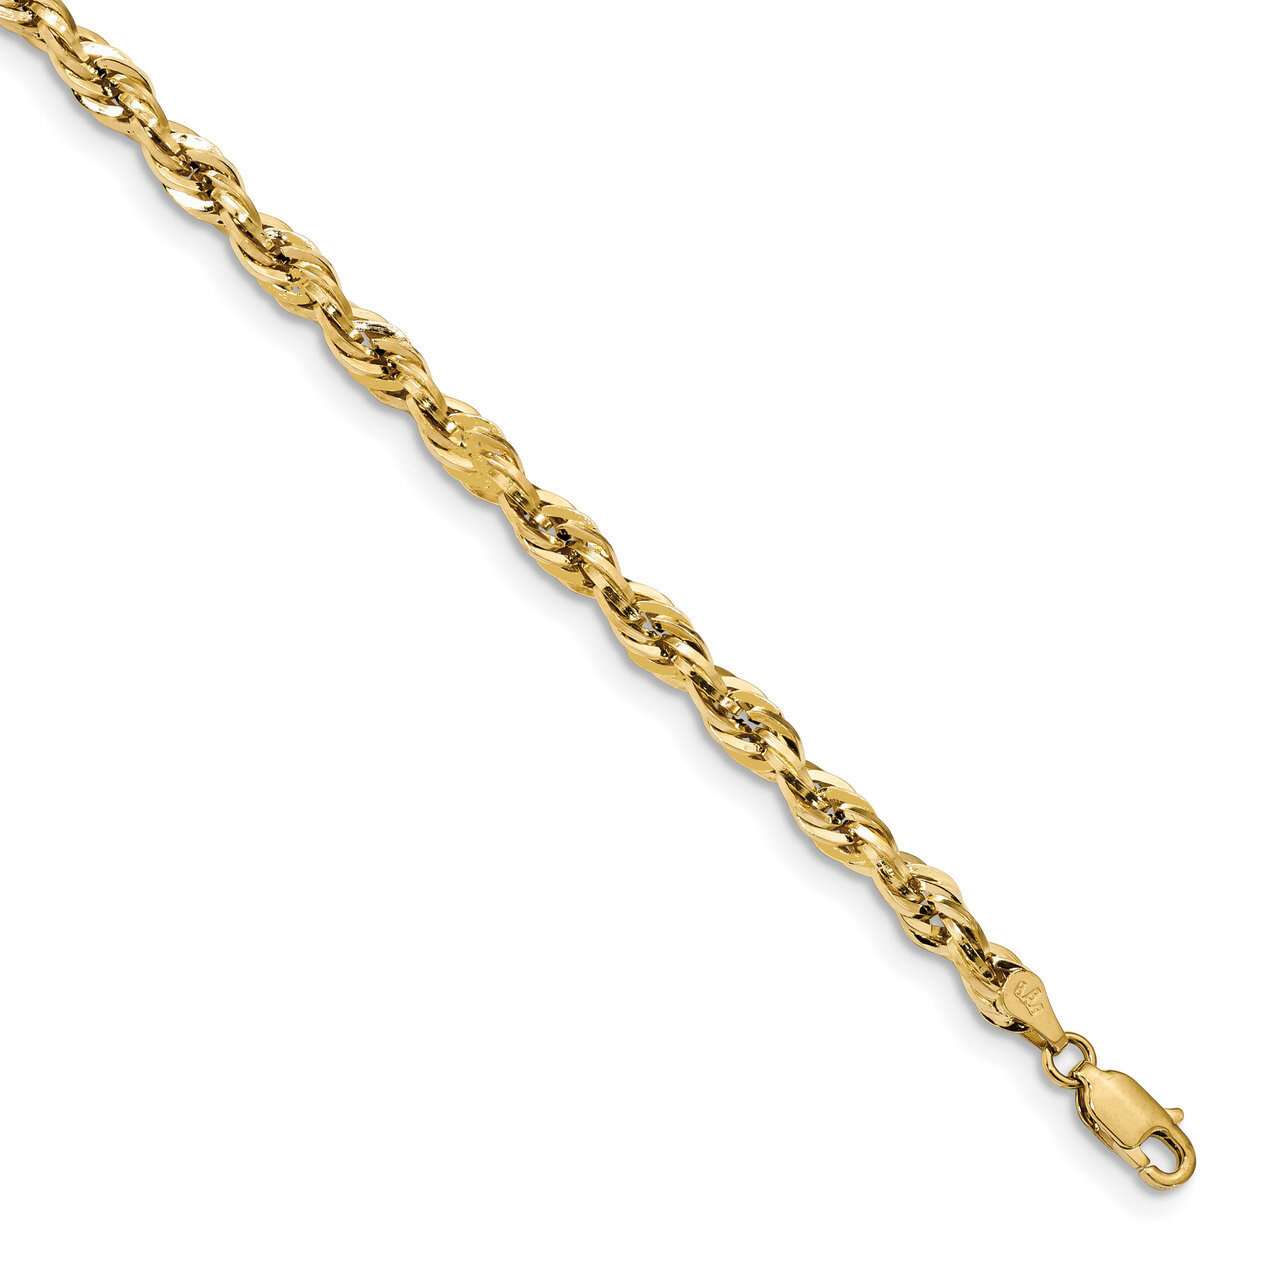 7 Inch 4.25mm Hollow Rope Chain 14k Gold BC168-7